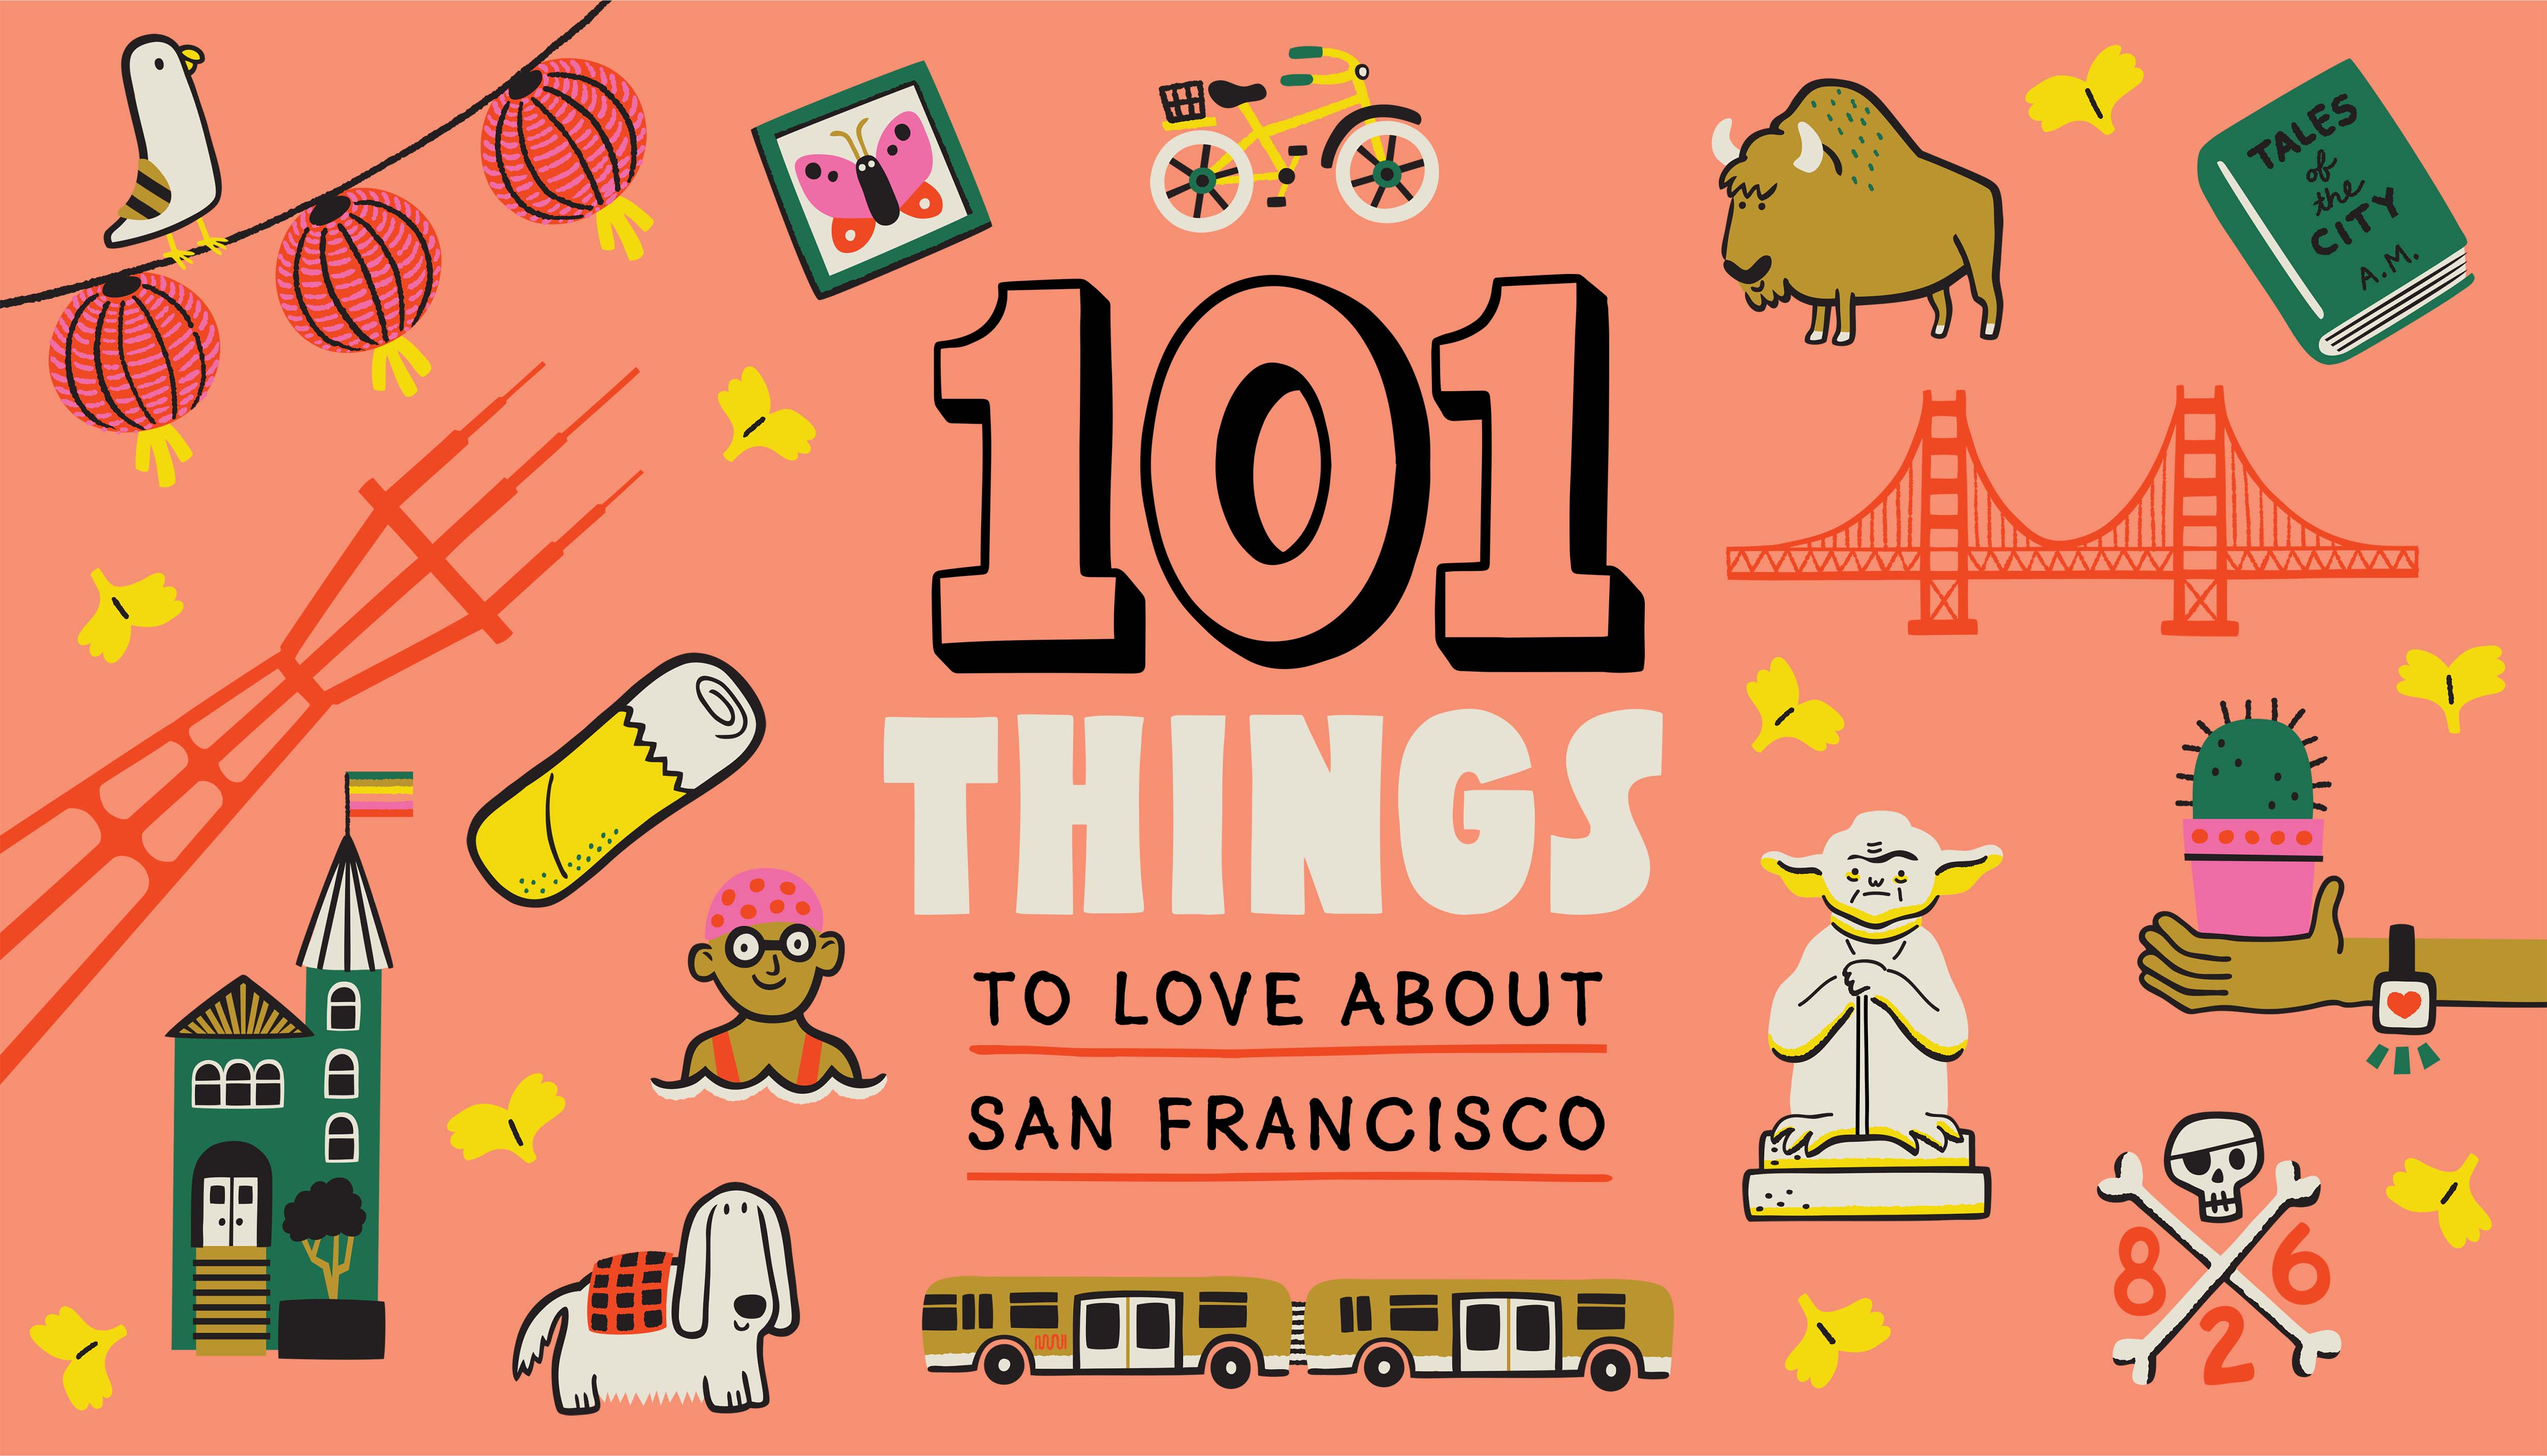 An illustrated pattern of notable San Fransisco landmarks including the Sutro Tower, paper lanterns, a Yoda statue, a bus, and the Golden Gate Bridge.